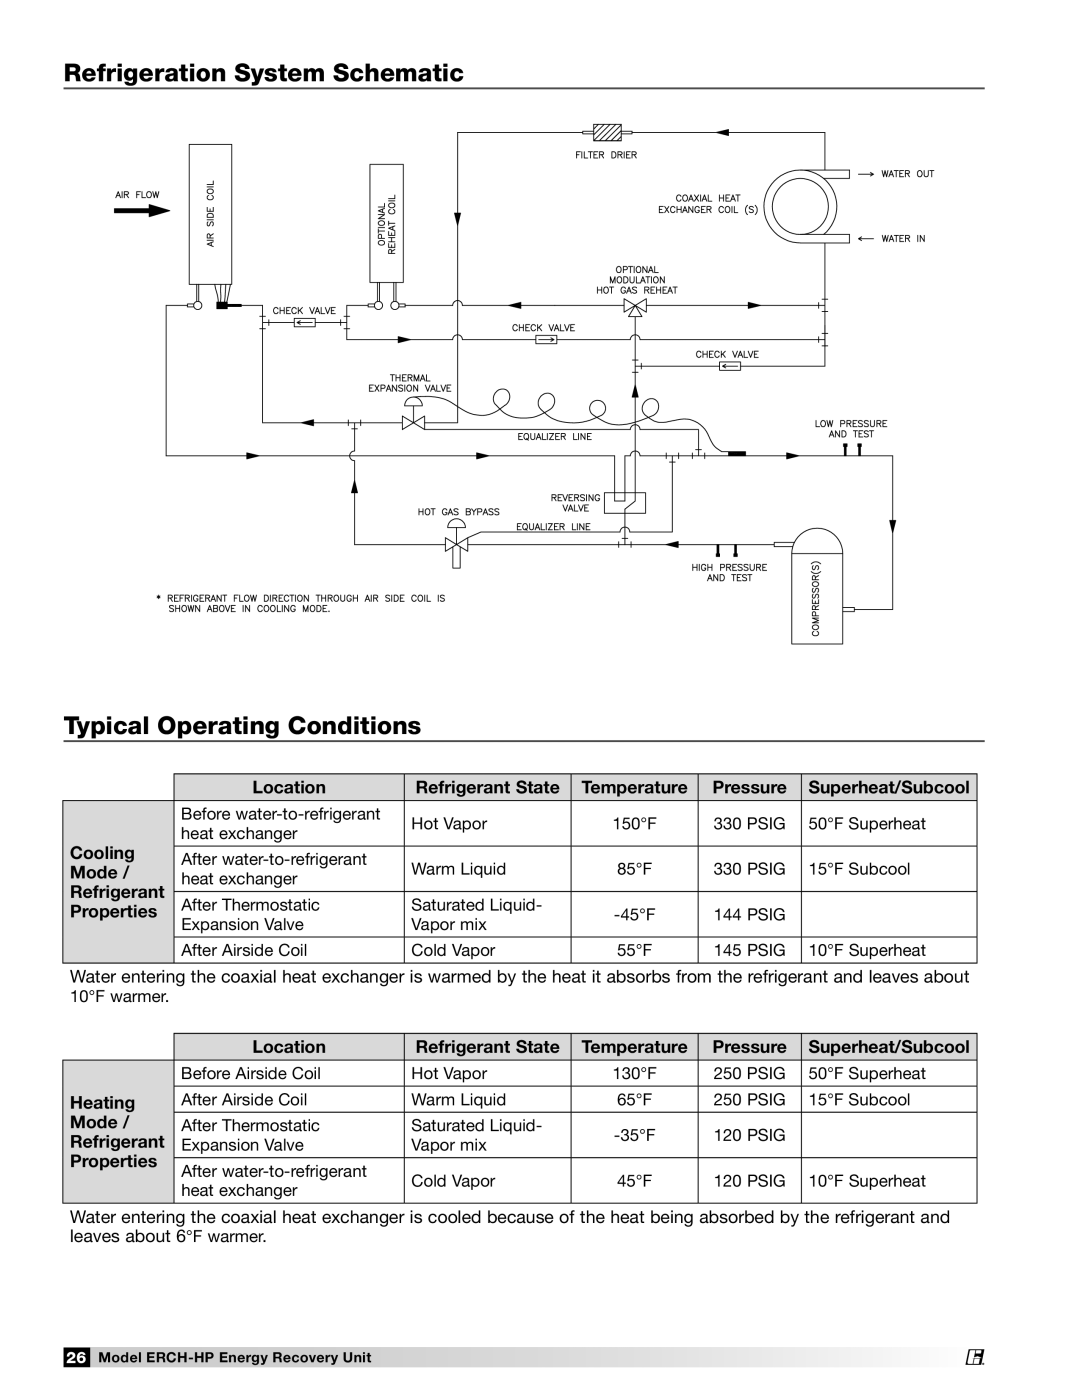 Greenheck Fan 473501 Refrigeration System Schematic, Typical Operating Conditions, Location, Refrigerant State, Pressure 